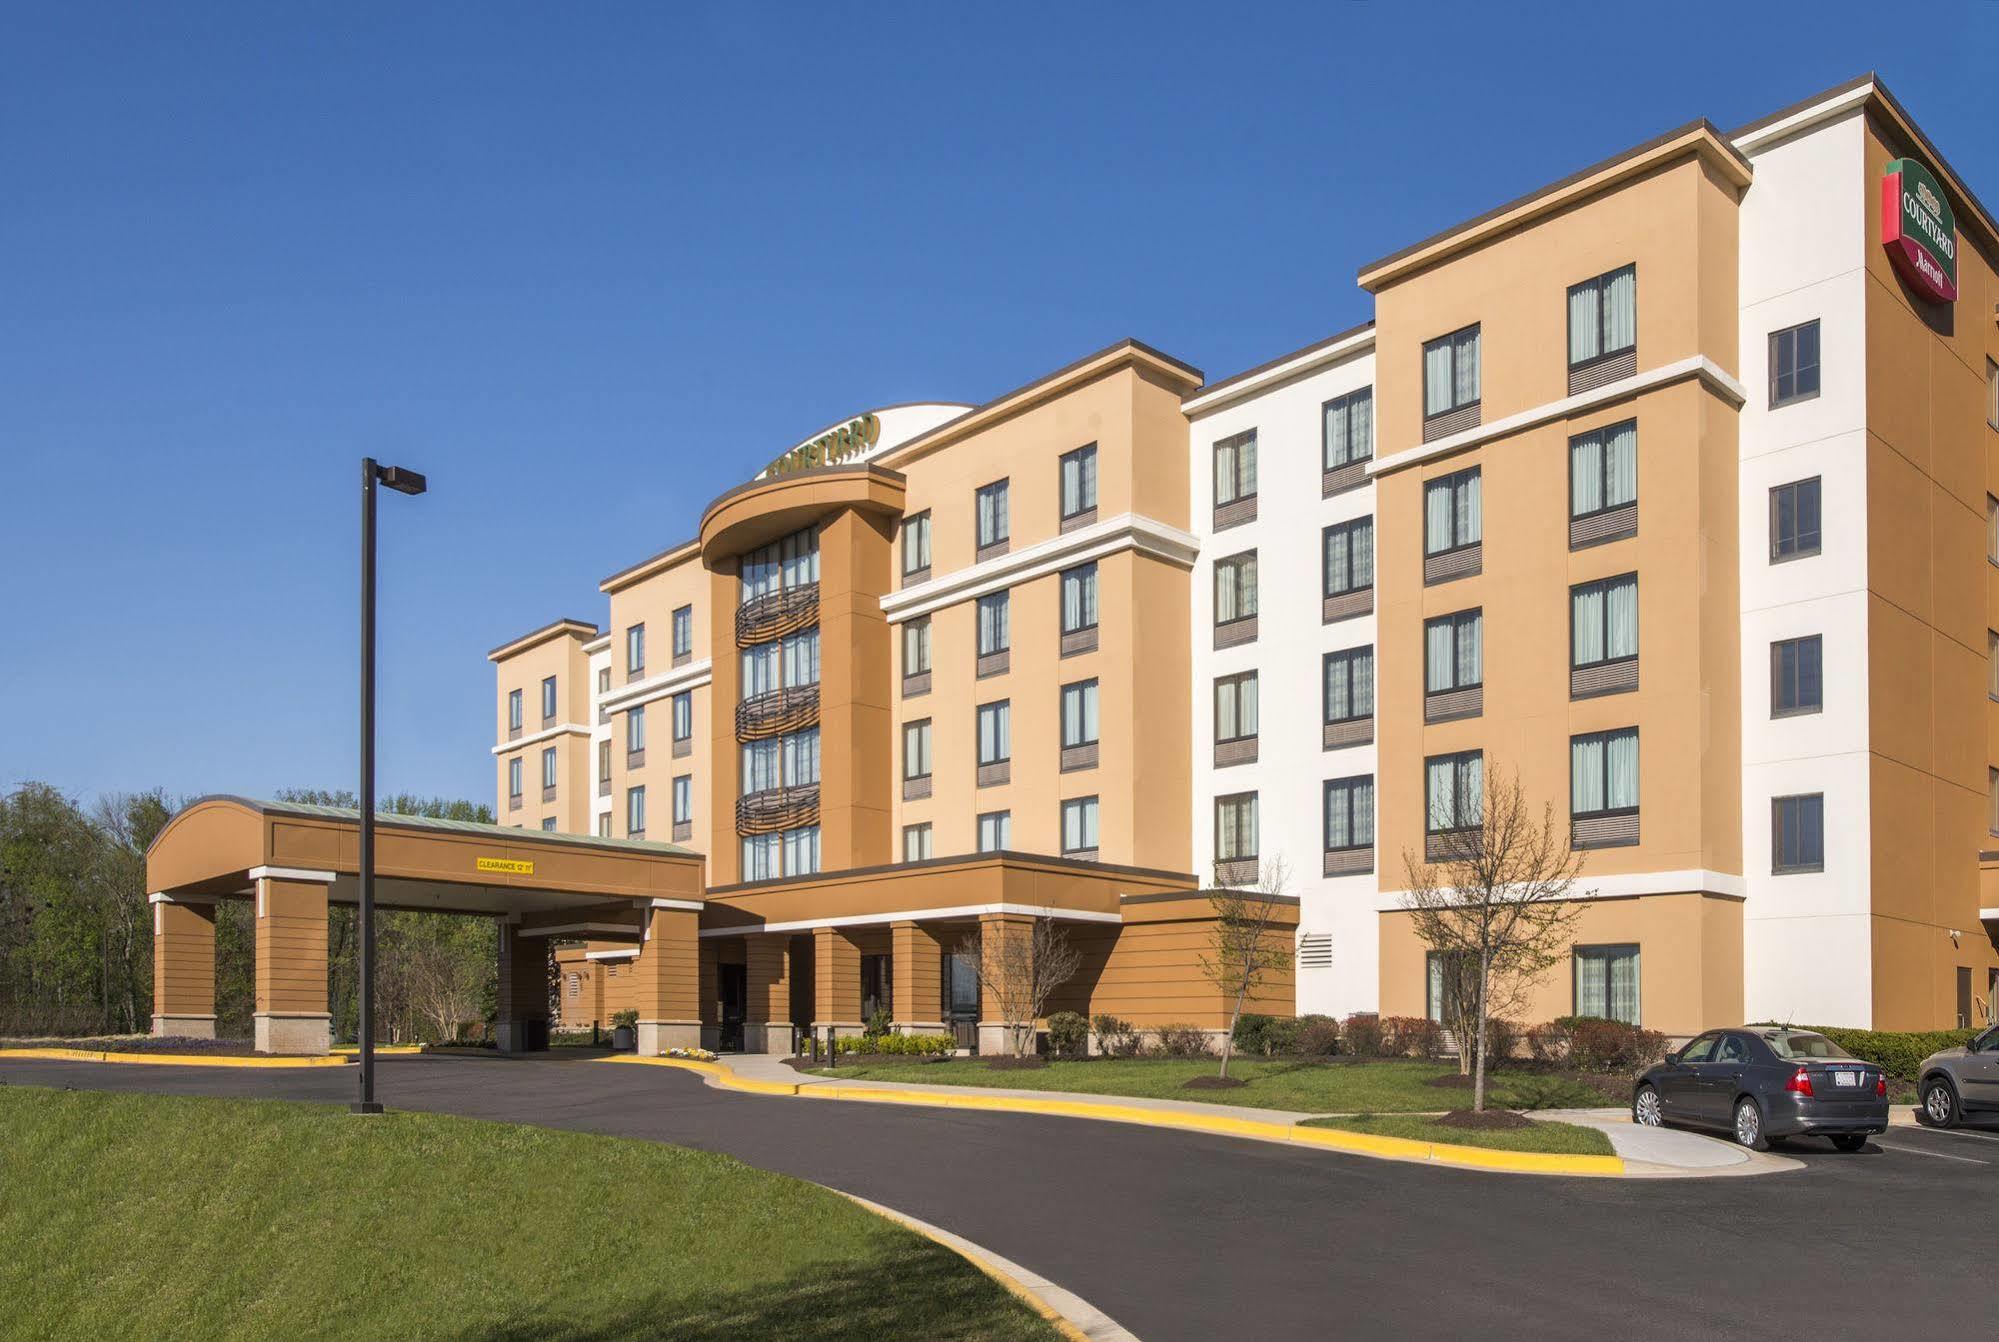 Courtyard Fort Meade BWI Business District Annapolis Junction Εξωτερικό φωτογραφία